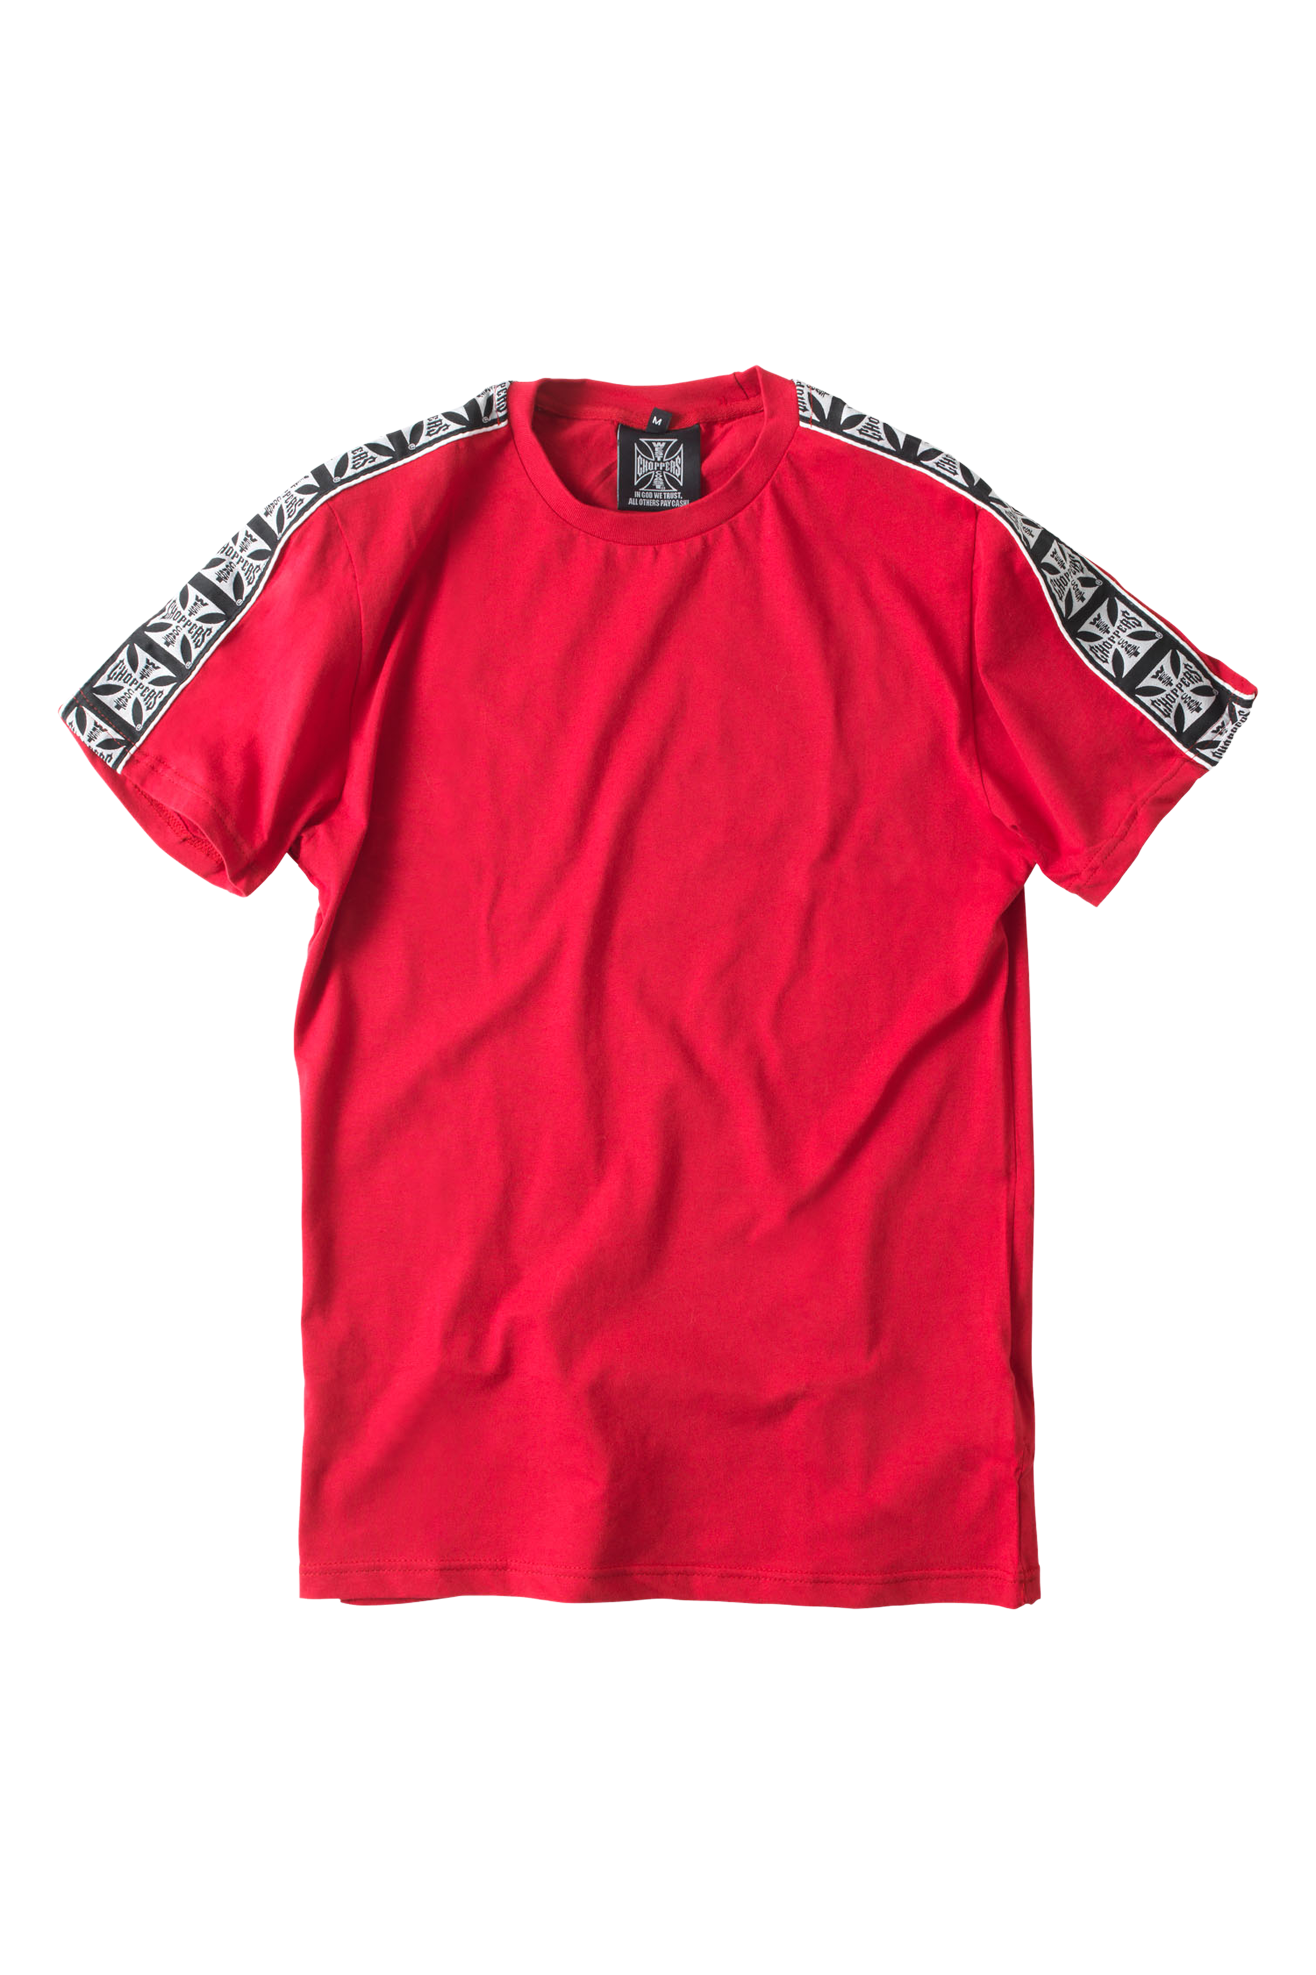 West Coast Choppers T-Shirt  Taped Rossa